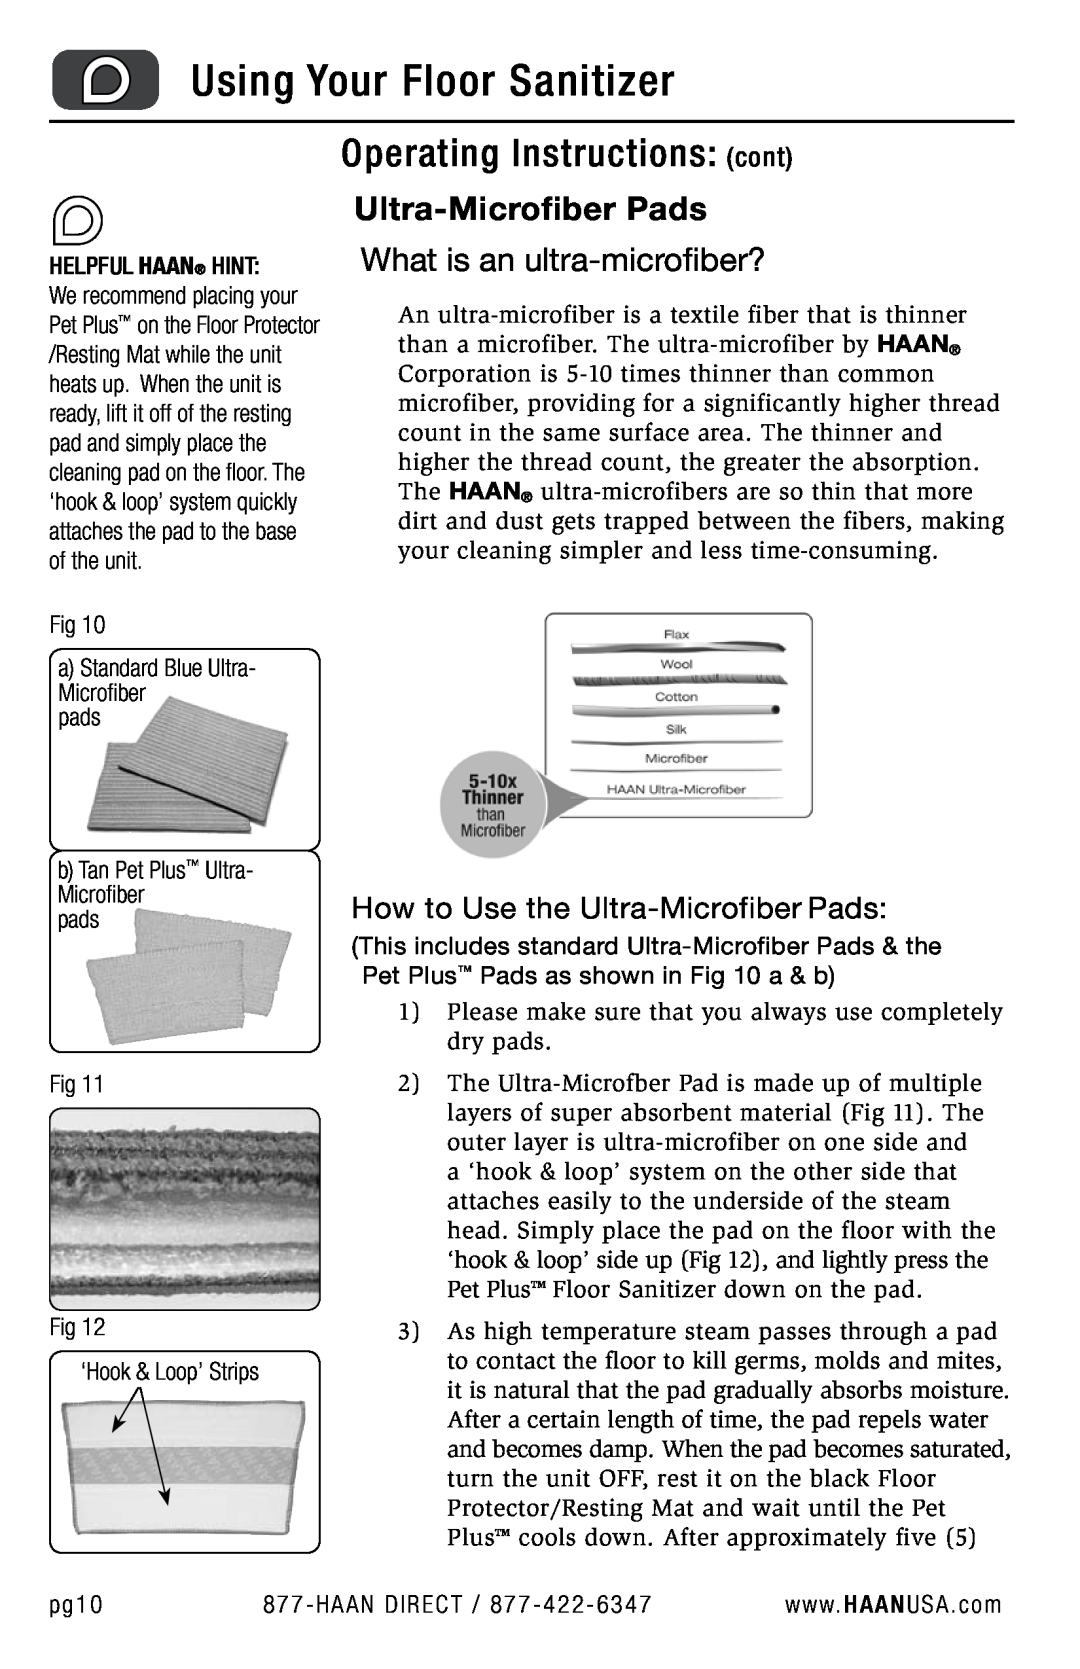 Haan FS-30P+ user manual Operating Instructions cont, How to Use the Ultra-Microfiber Pads, Using Your Floor Sanitizer 